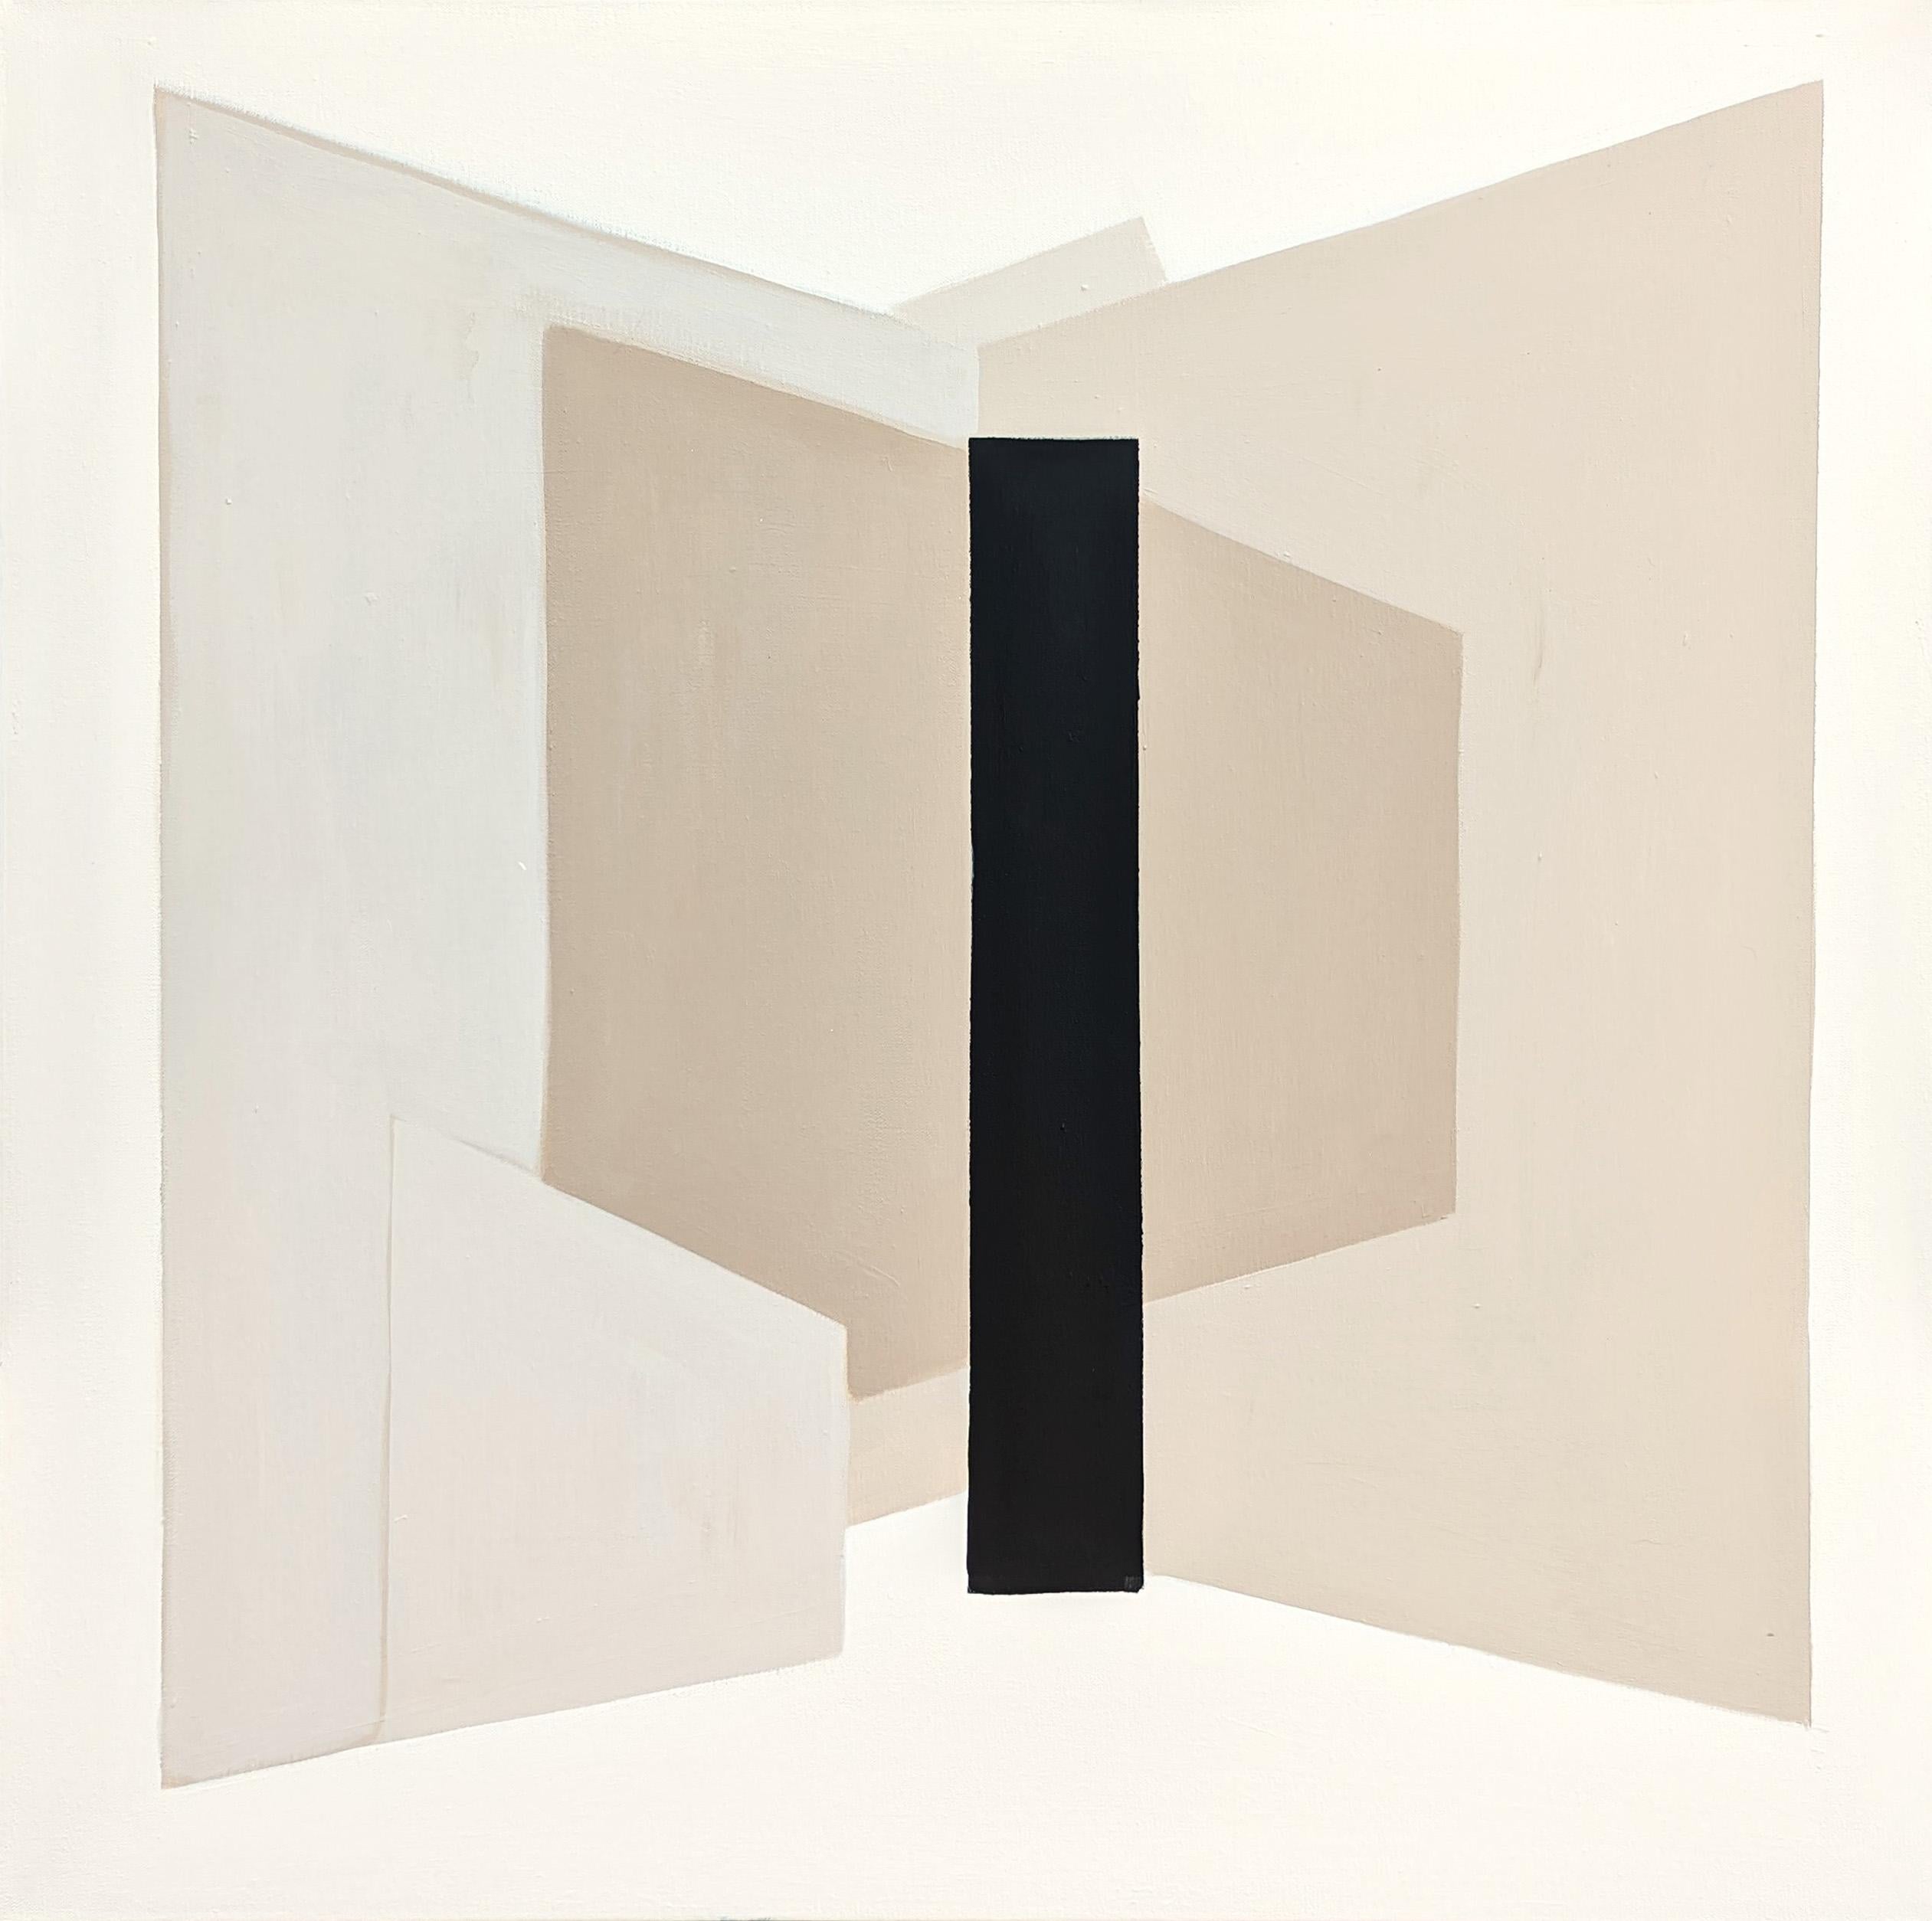 Stephanie Beukers Landscape Painting - "L'Espace 2" Black & Tan Contemporary Geometric Abstract Hard- Edge Painting